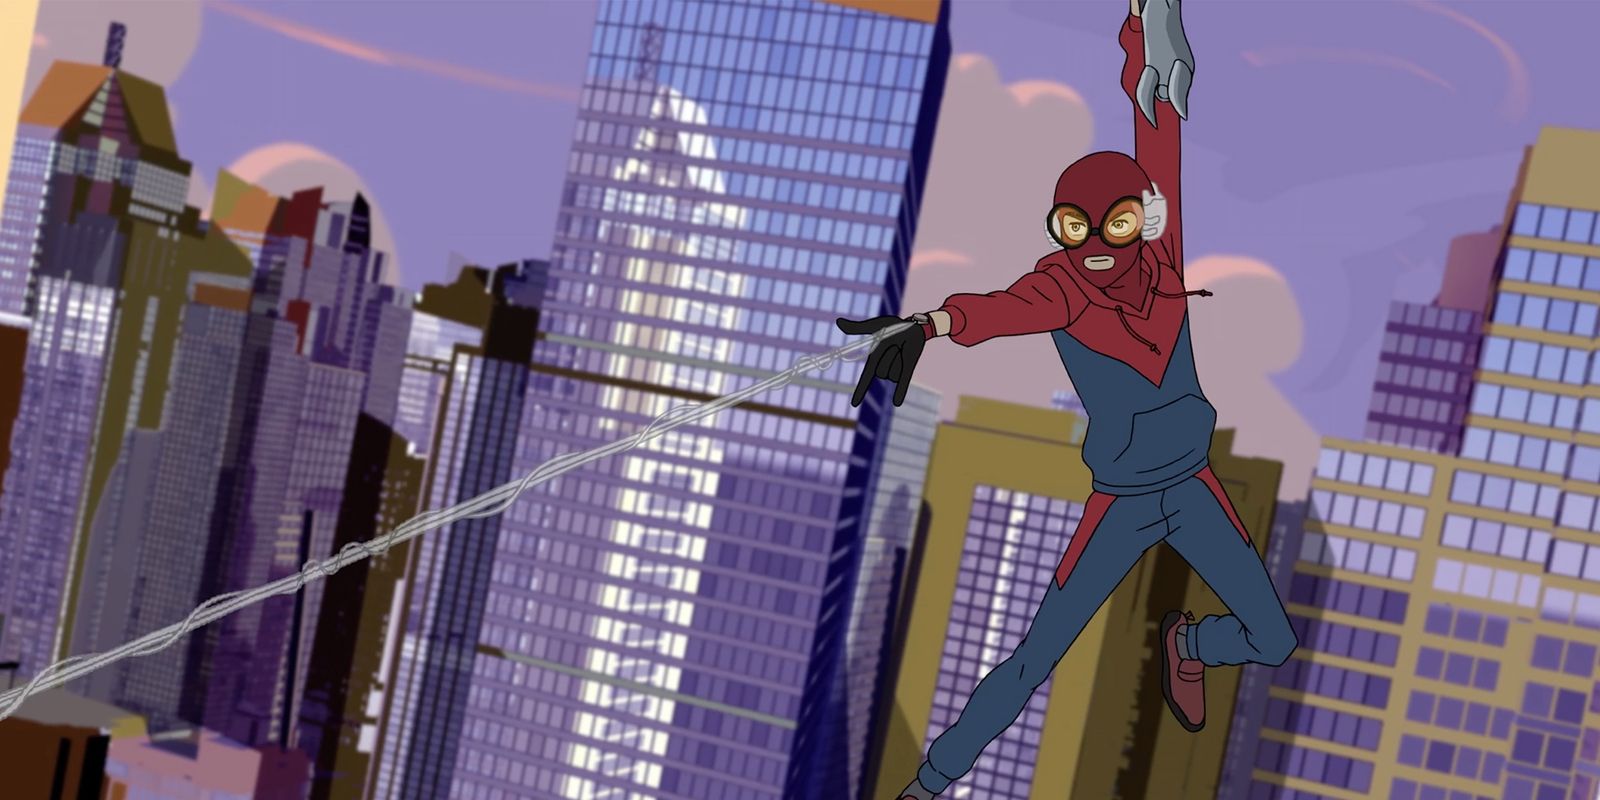 Peter Parker's Spider-Man swings through the air in blue and red sweatsuit and helmet in Marvel's Spider-Man premiere on Disney